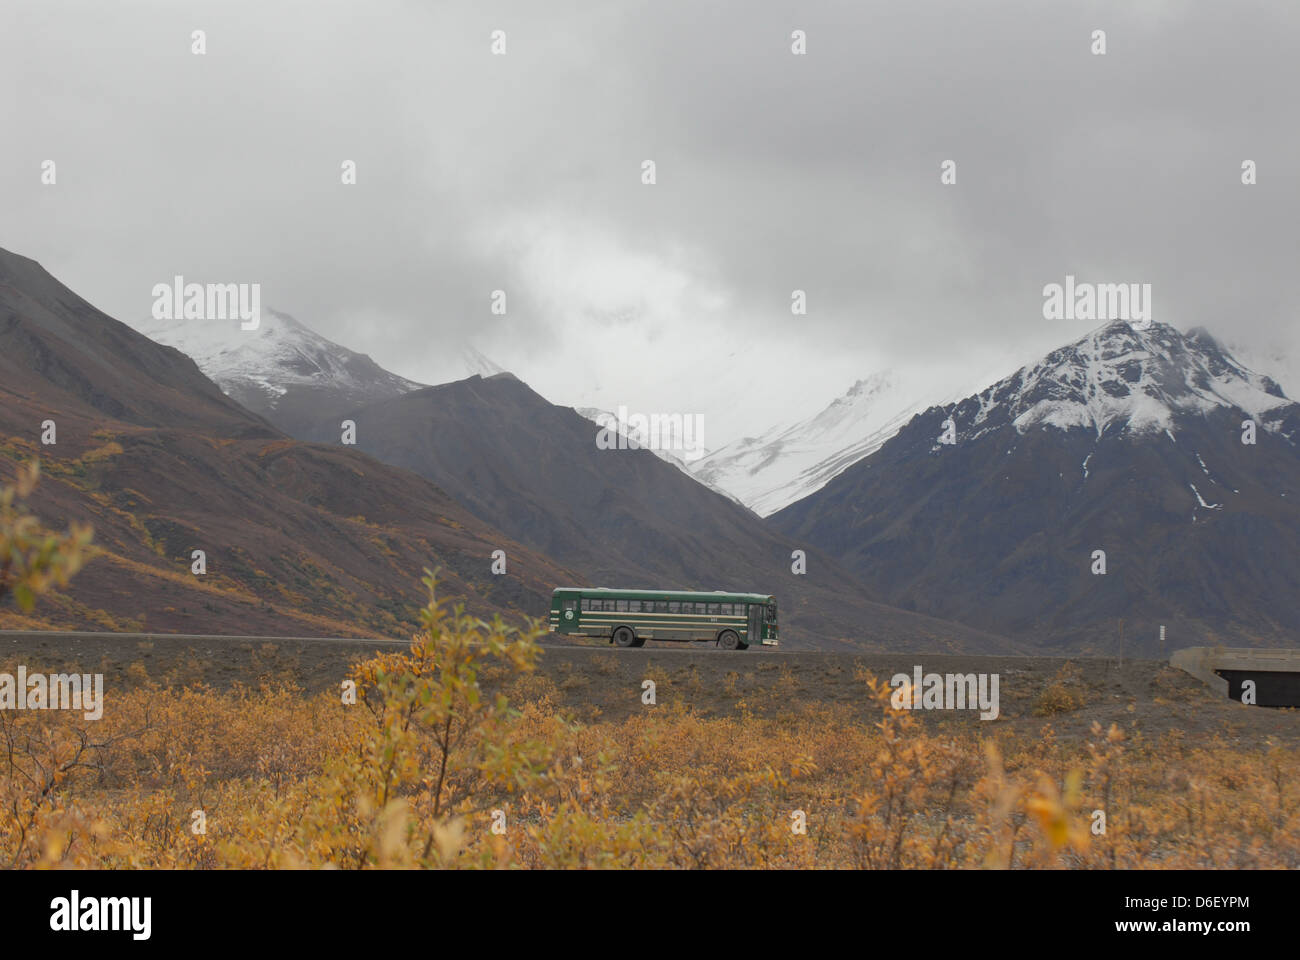 A bus carrying passengers drives along a road in Denali National Park, Alaska during the fall. Stock Photo